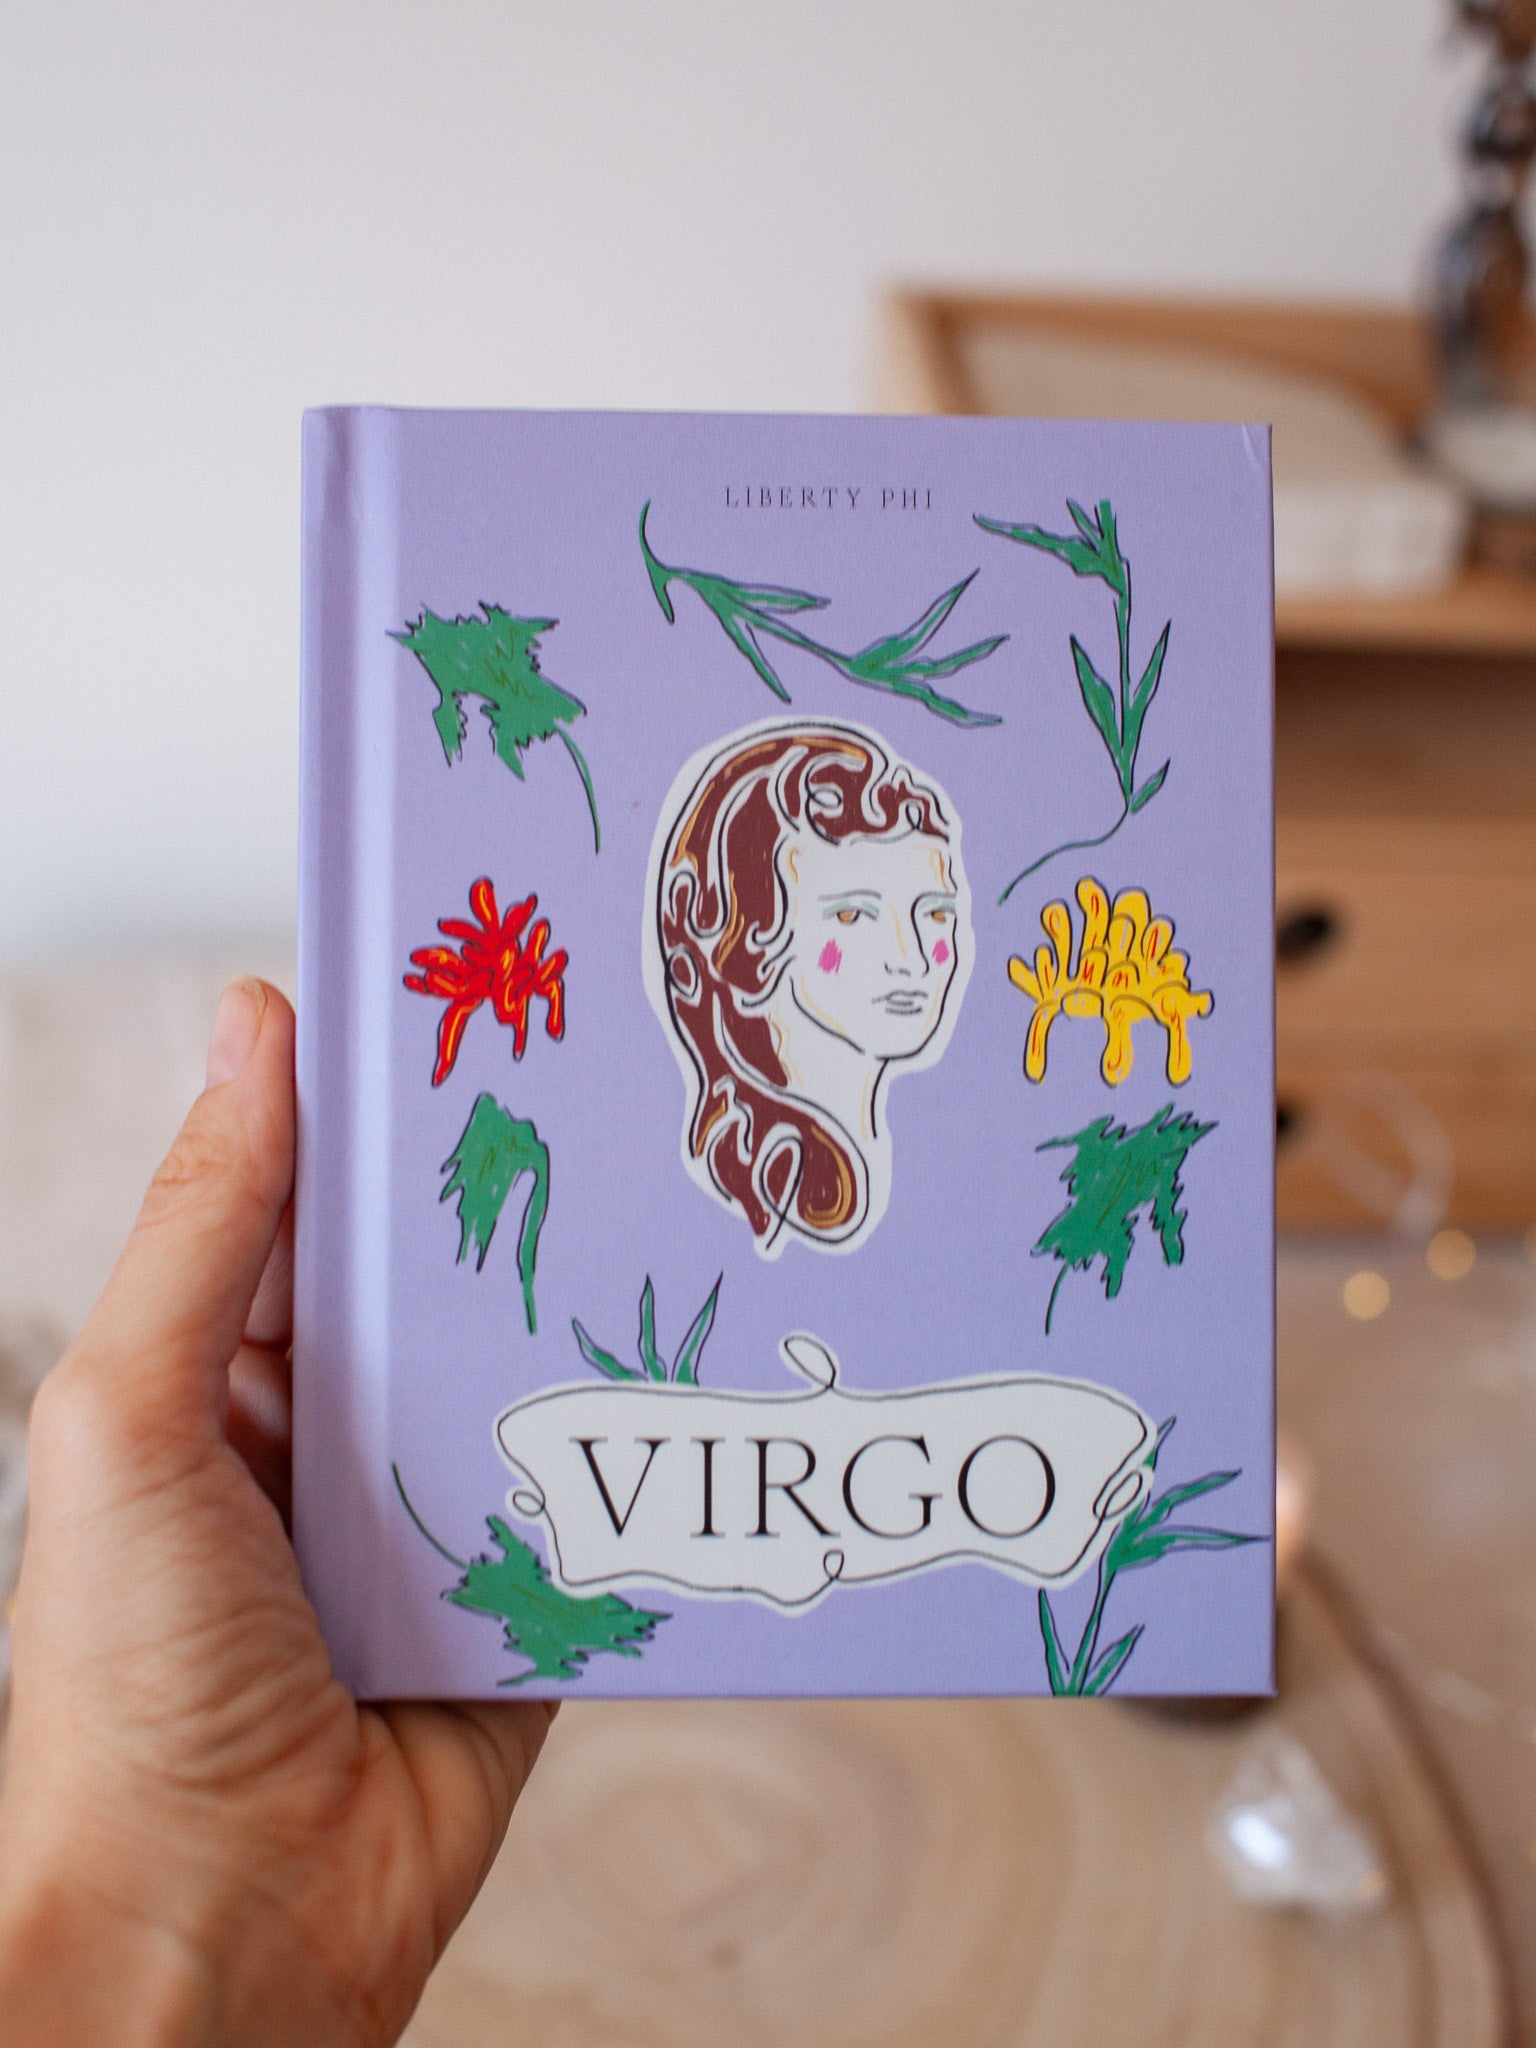 Virgo Book by Liberty Phi | Astrology Gifts